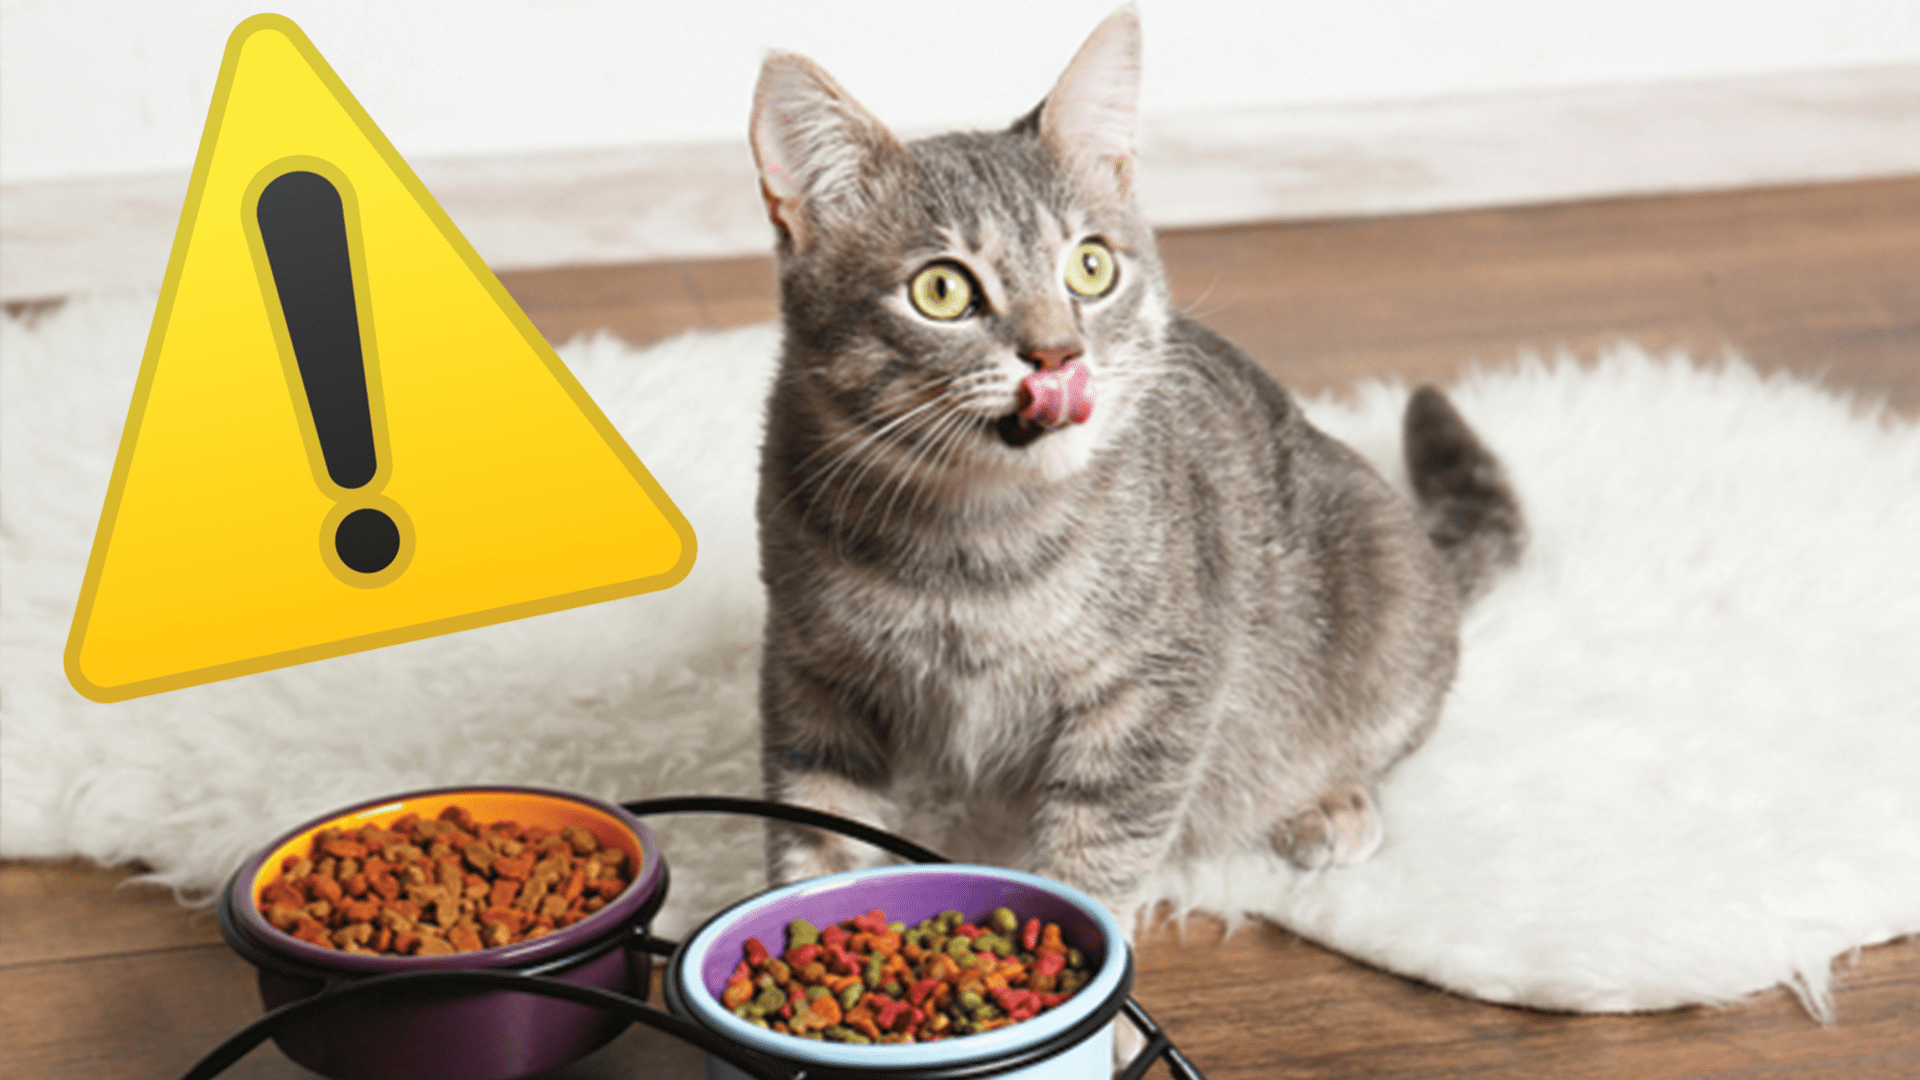 Cat Owners Warned Over Their Feeding Behavior That Could Lead To